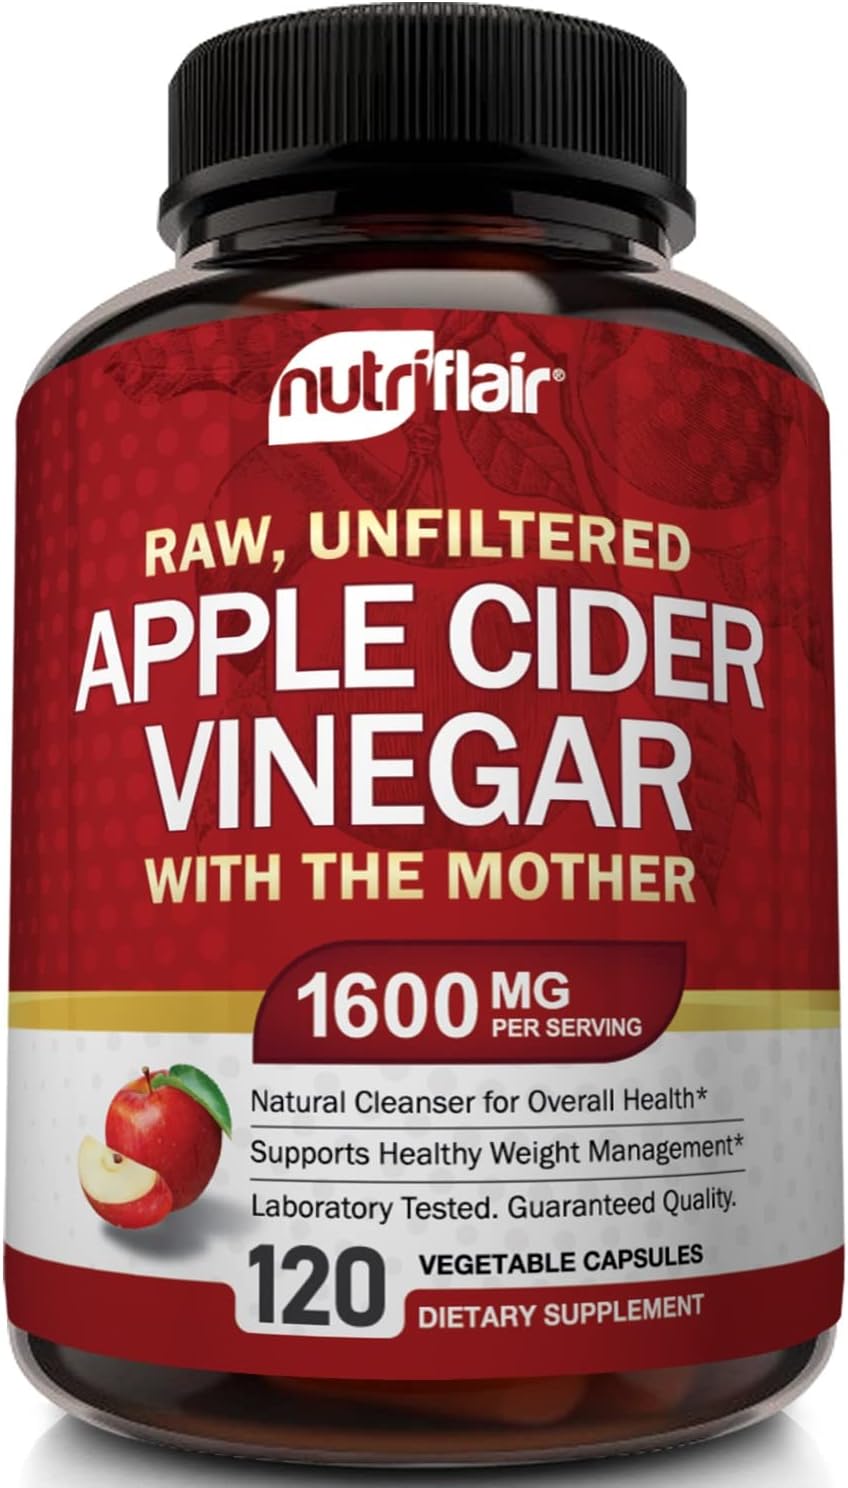 Apple Cider Vinegar Capsules with The Mother Review